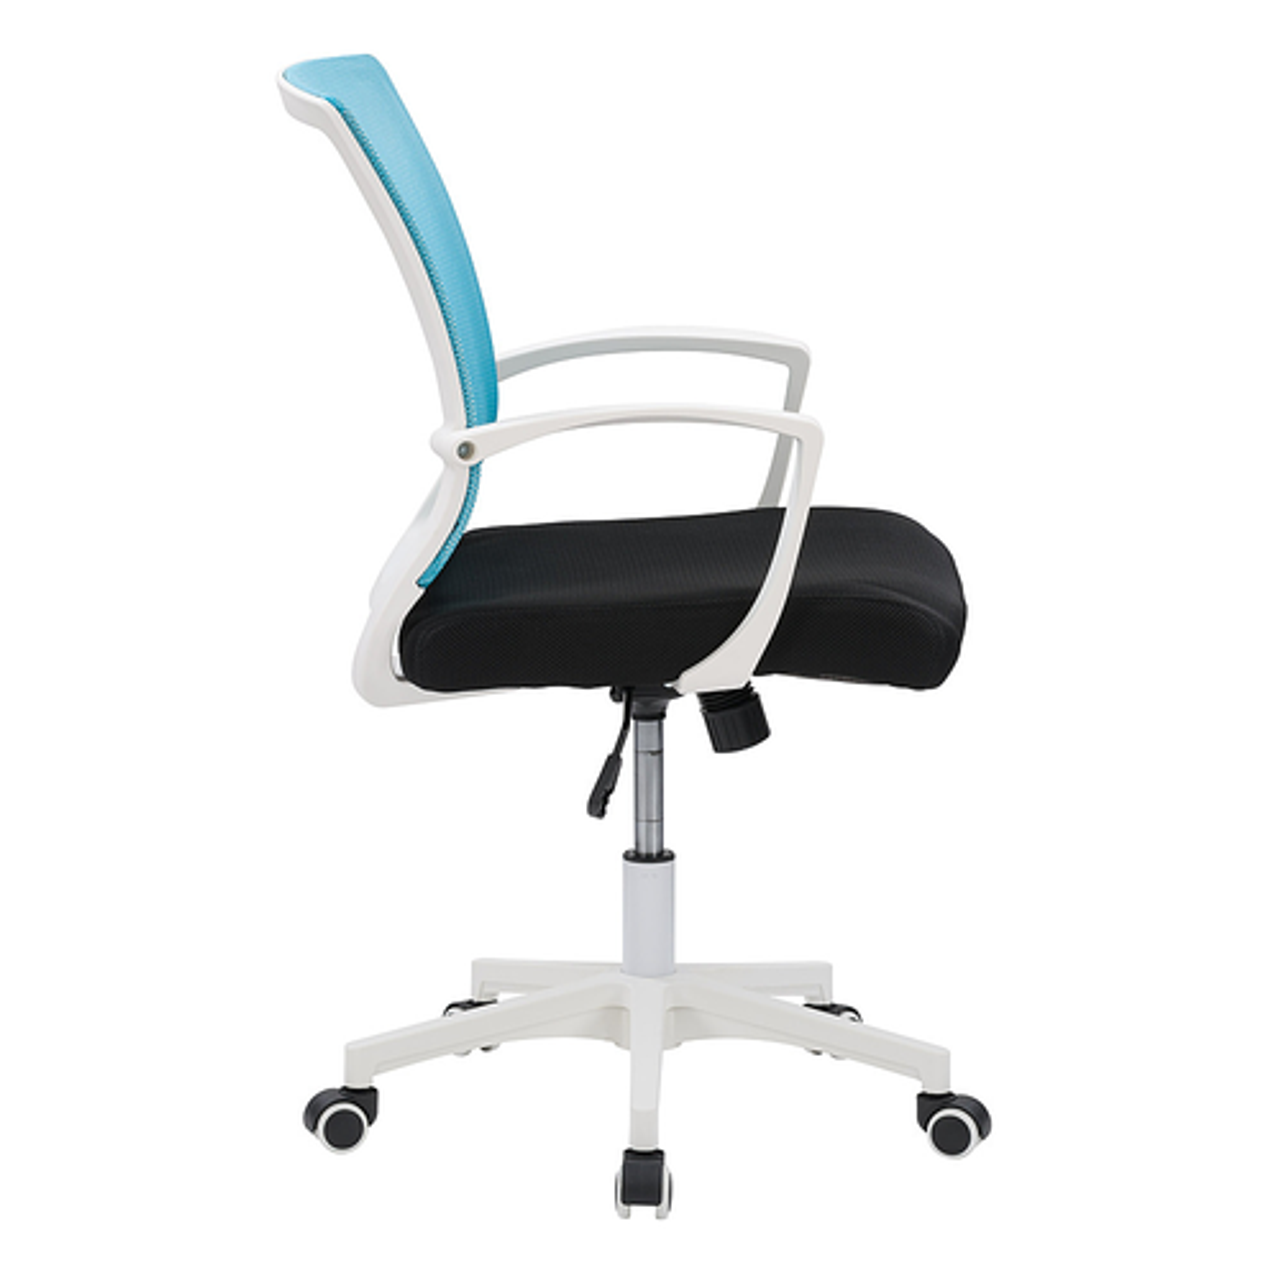 CorLiving Workspace Ergonomic Teal Mesh Back Office Chair - Teal and White